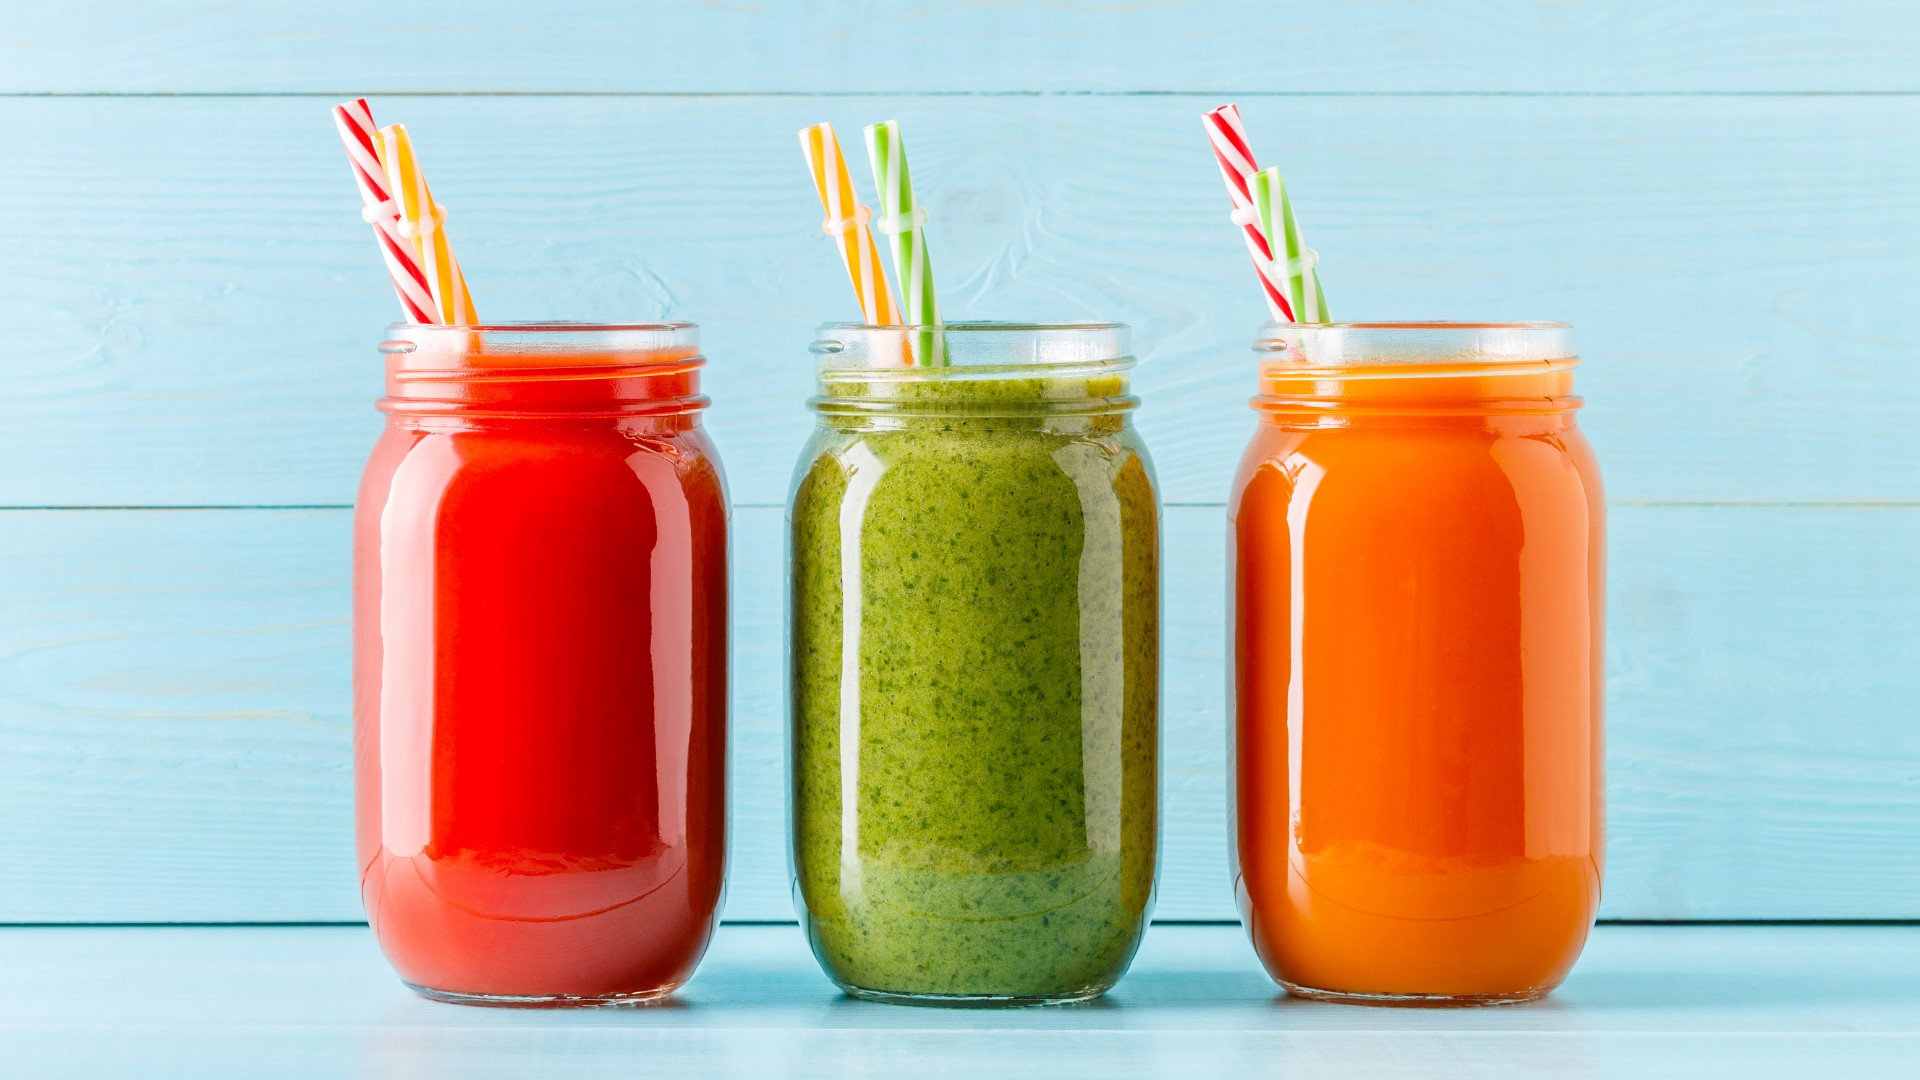 The weather has gotten warmer and if you're looking for a healthy way to start your spring days -- consider whipping up some delicious smoothies.